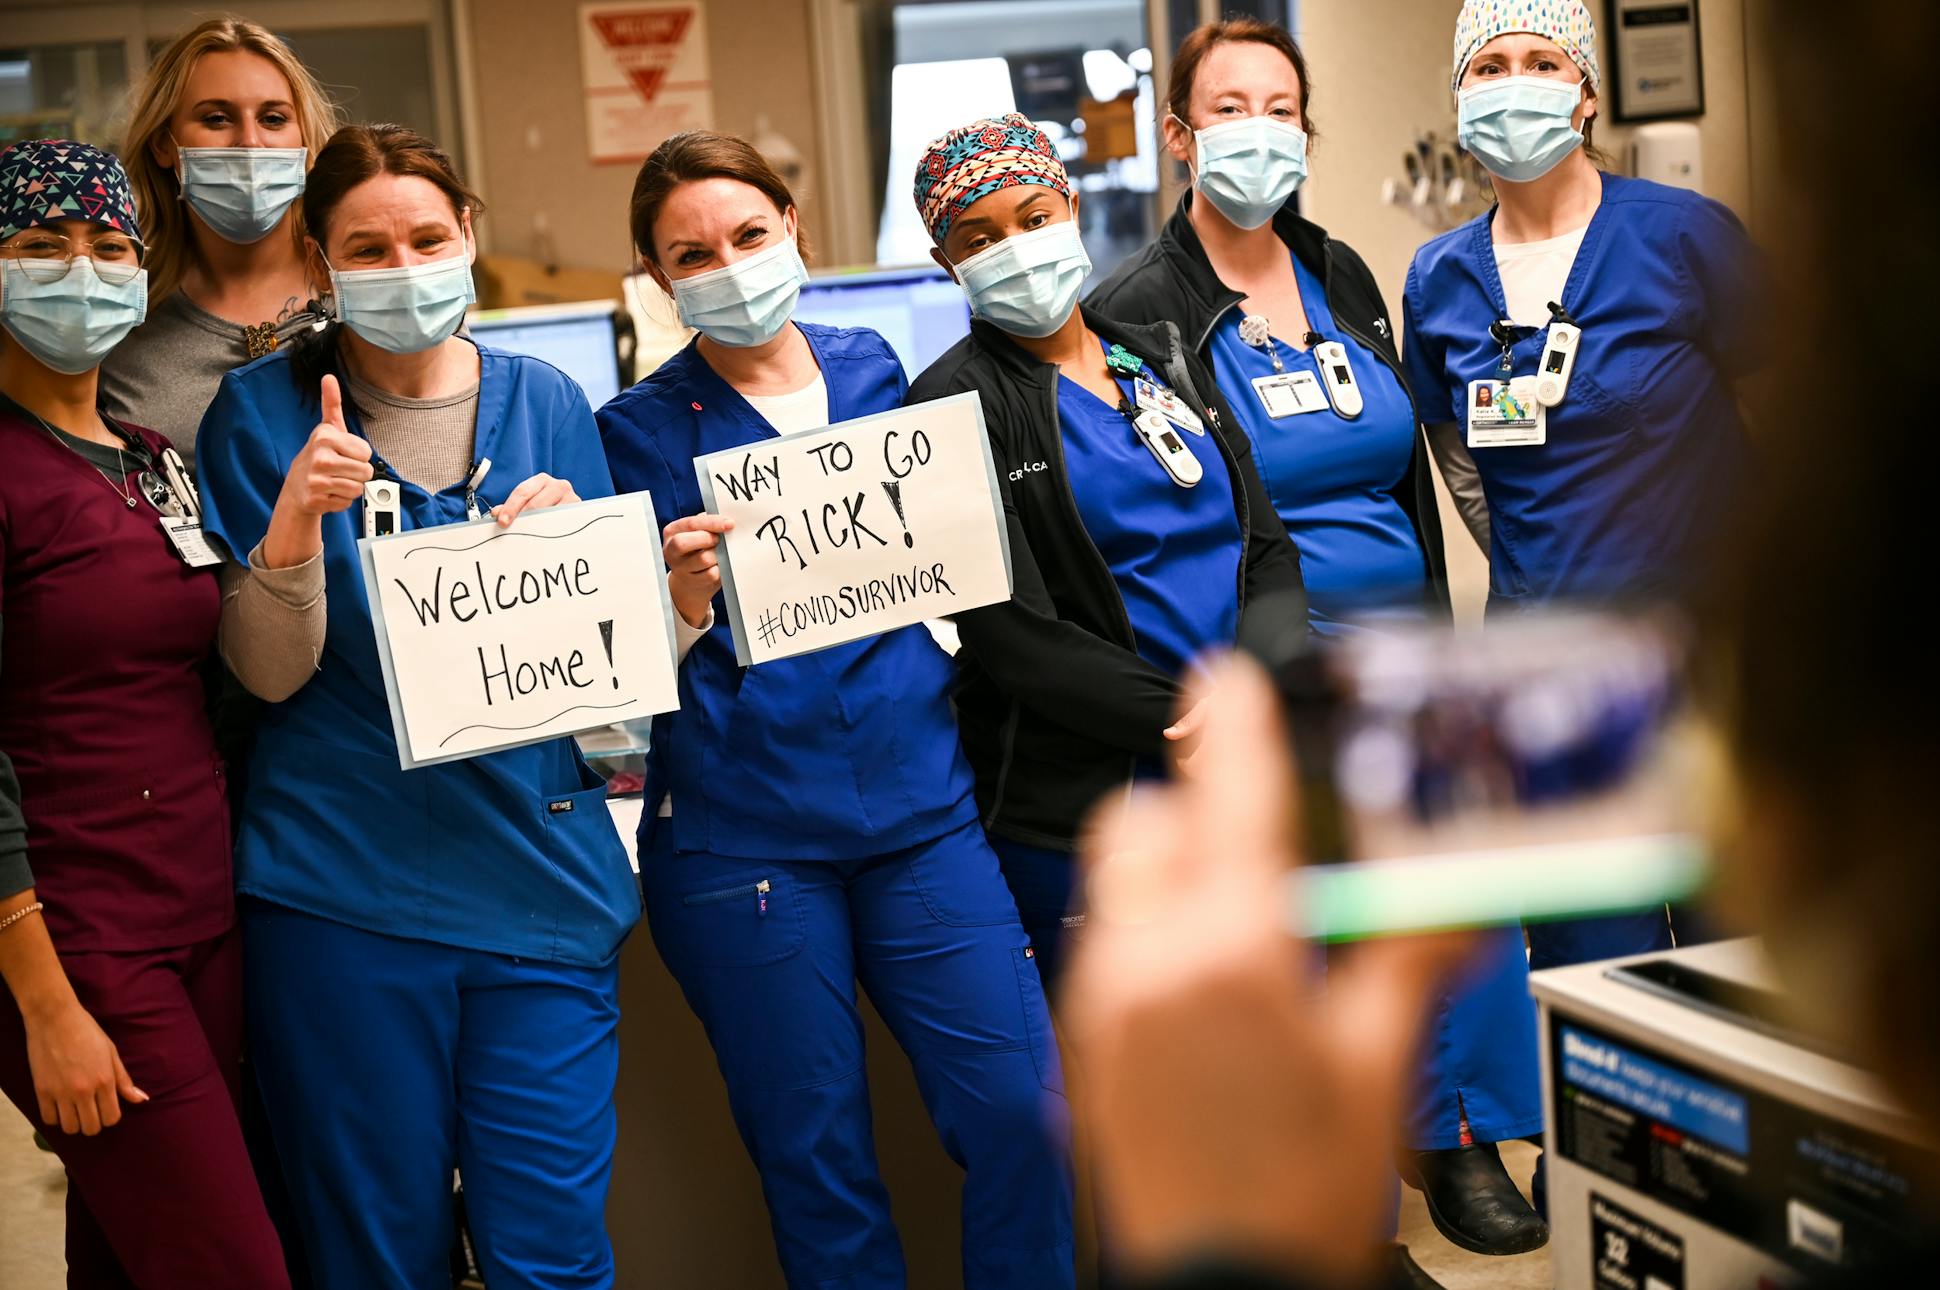 ICU nurses celebrated the return home of patient Rick Ulrich, who spent weeks fighting for his life. When Ulrich sat up for the first time, cheers broke out in the unit. “We get excited for very small things,” Vilione said. “But this is a huge thing in his life.” 